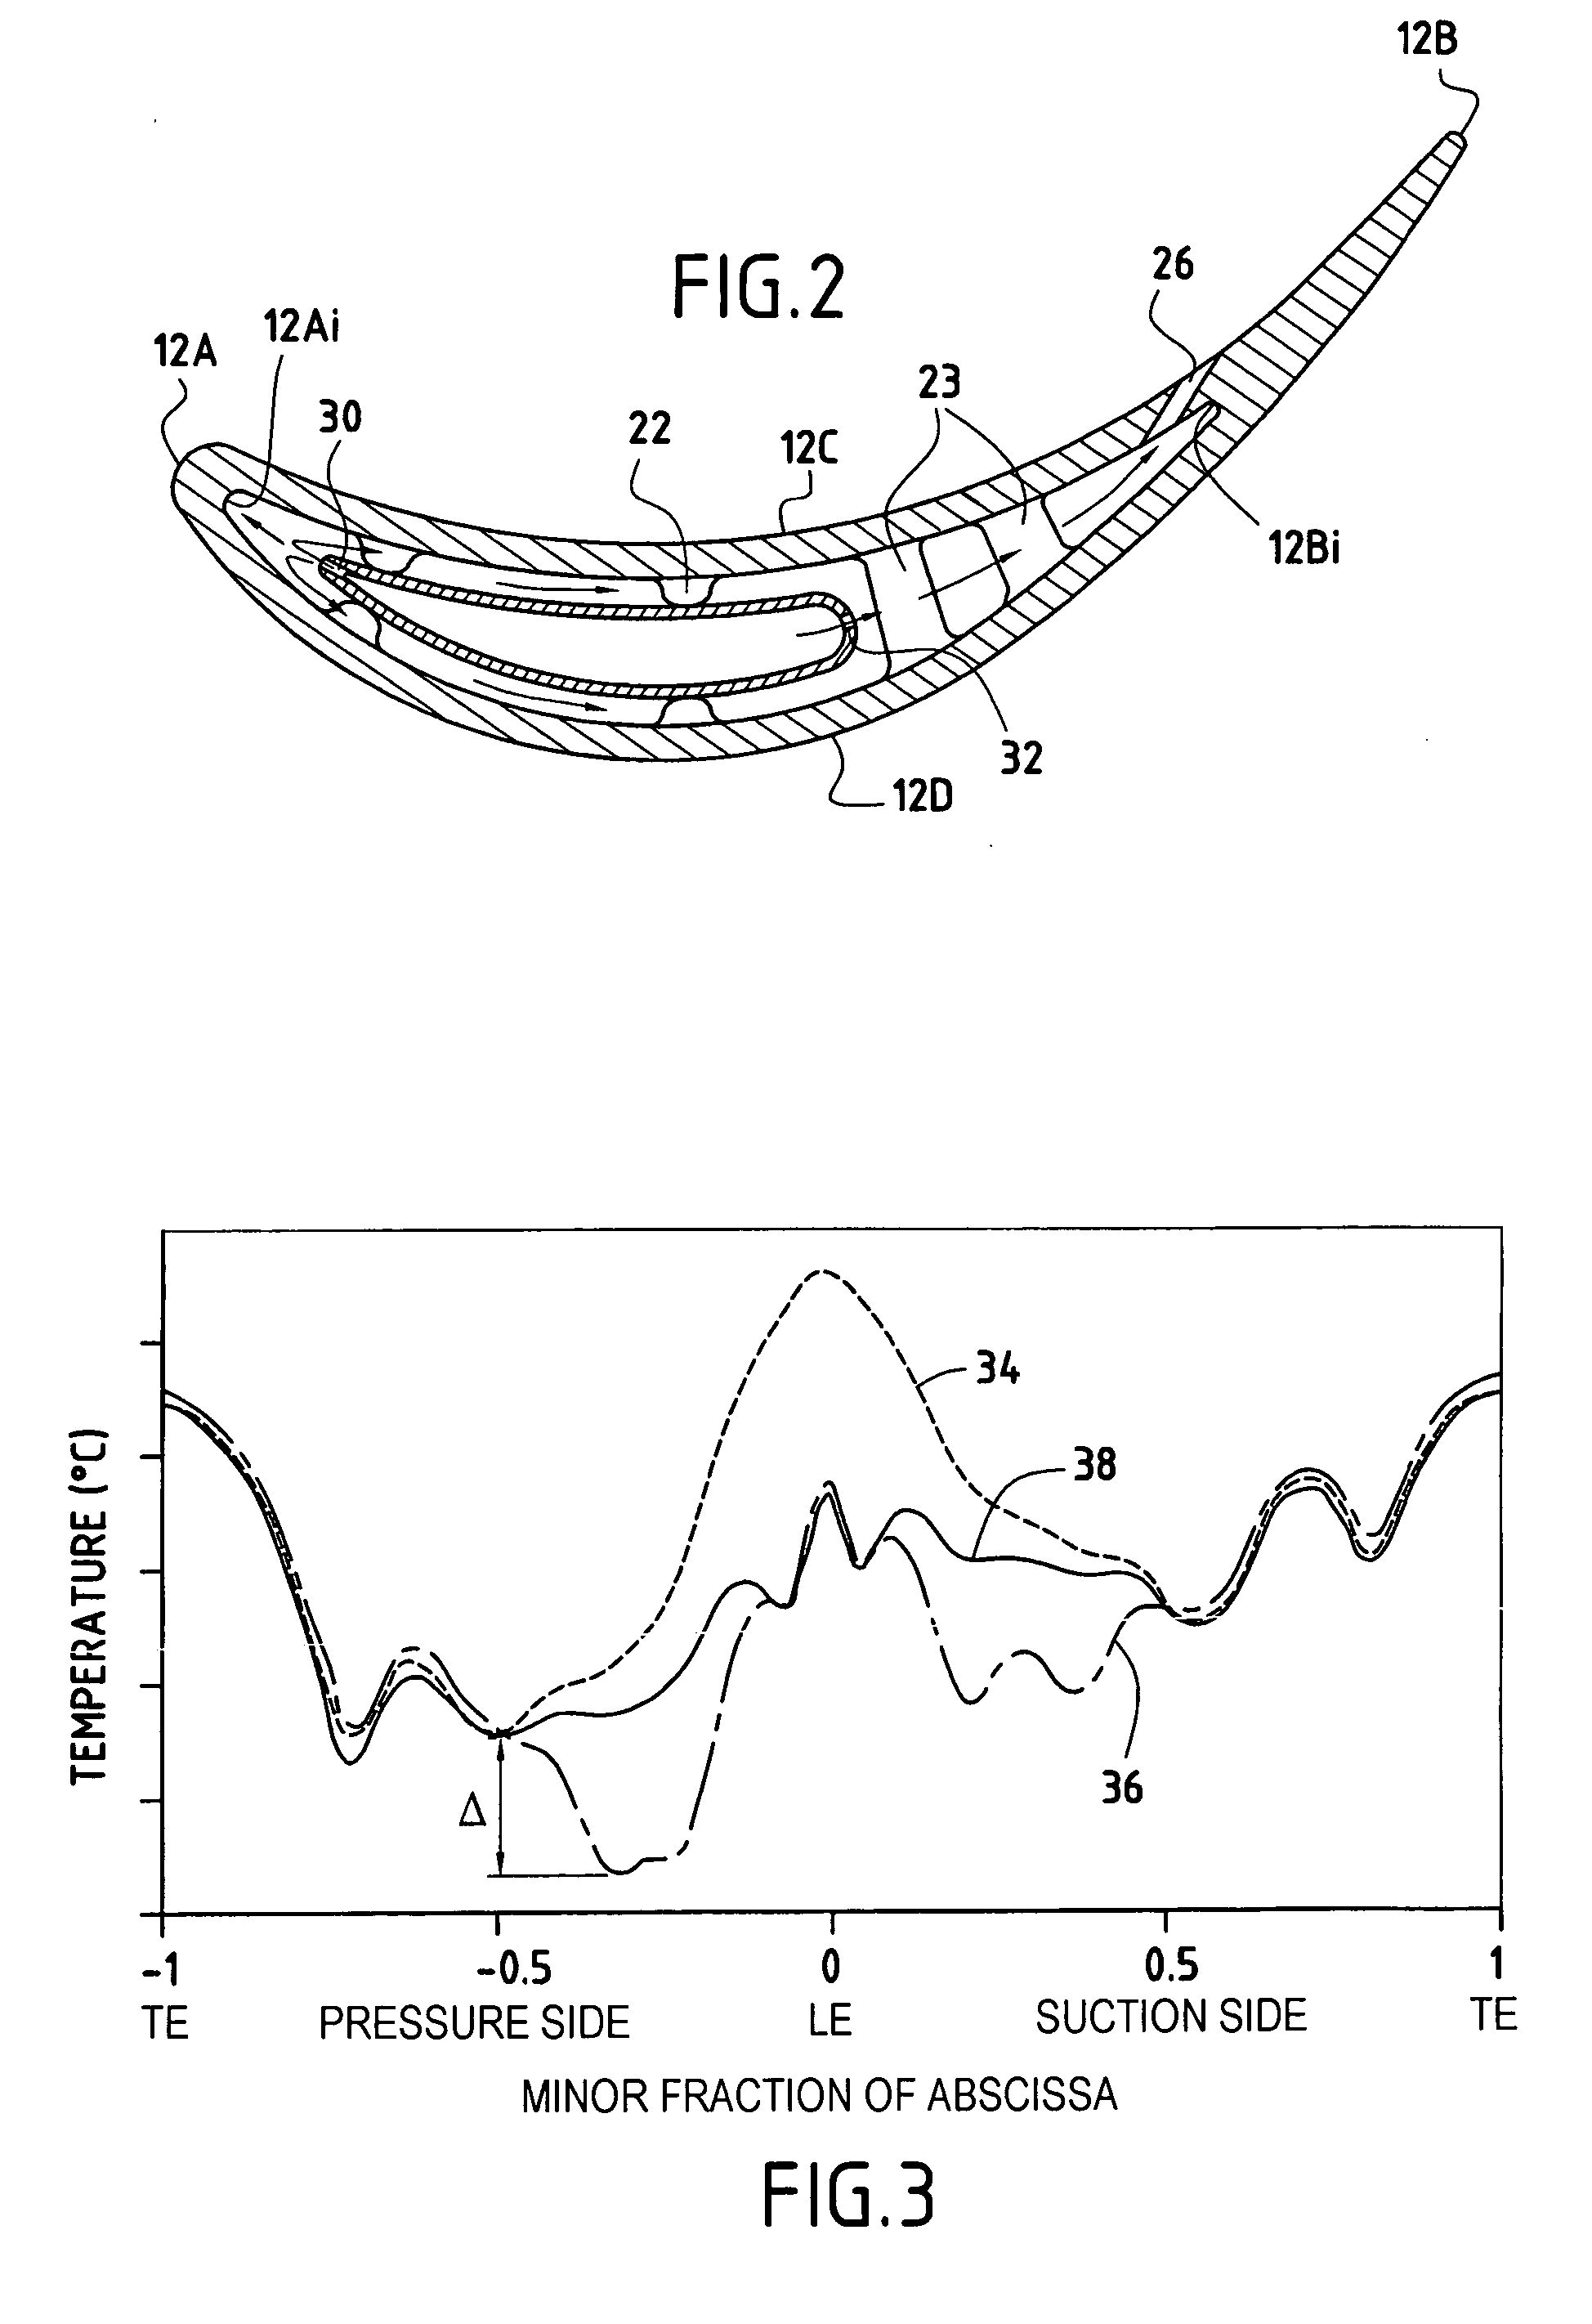 Stator turbine vane with improved cooling